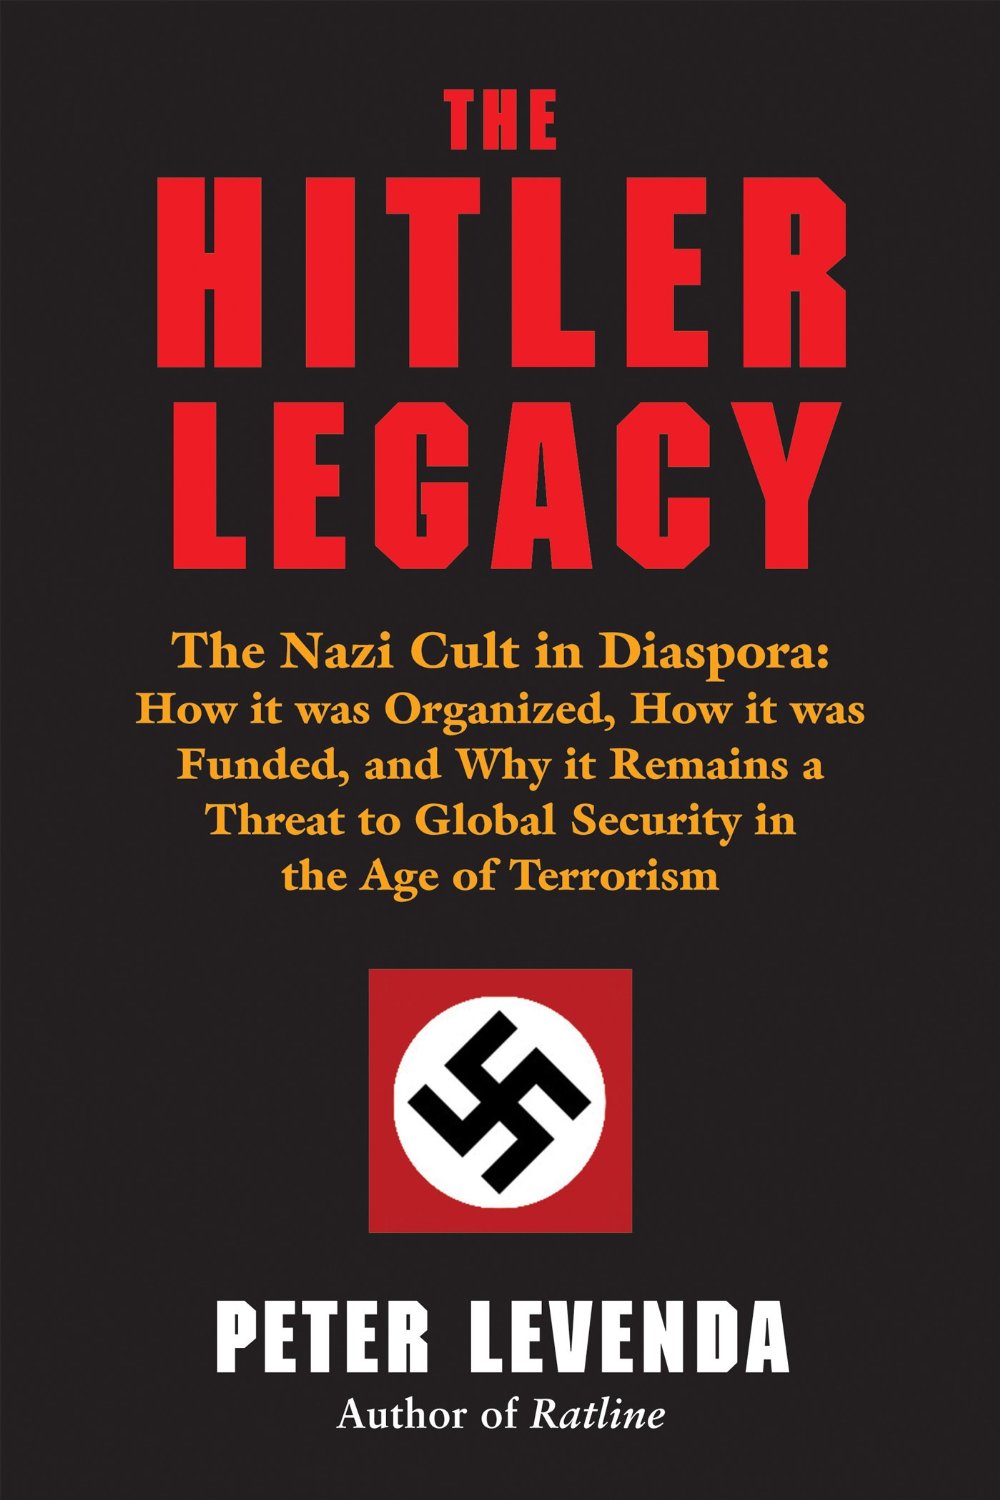 The Hitler Legacy: The Nazi Cult in Diaspora: How It Was Organized, How It Was Funded, and Why It Remains a Threat to Global Security in the Age of Terrorism